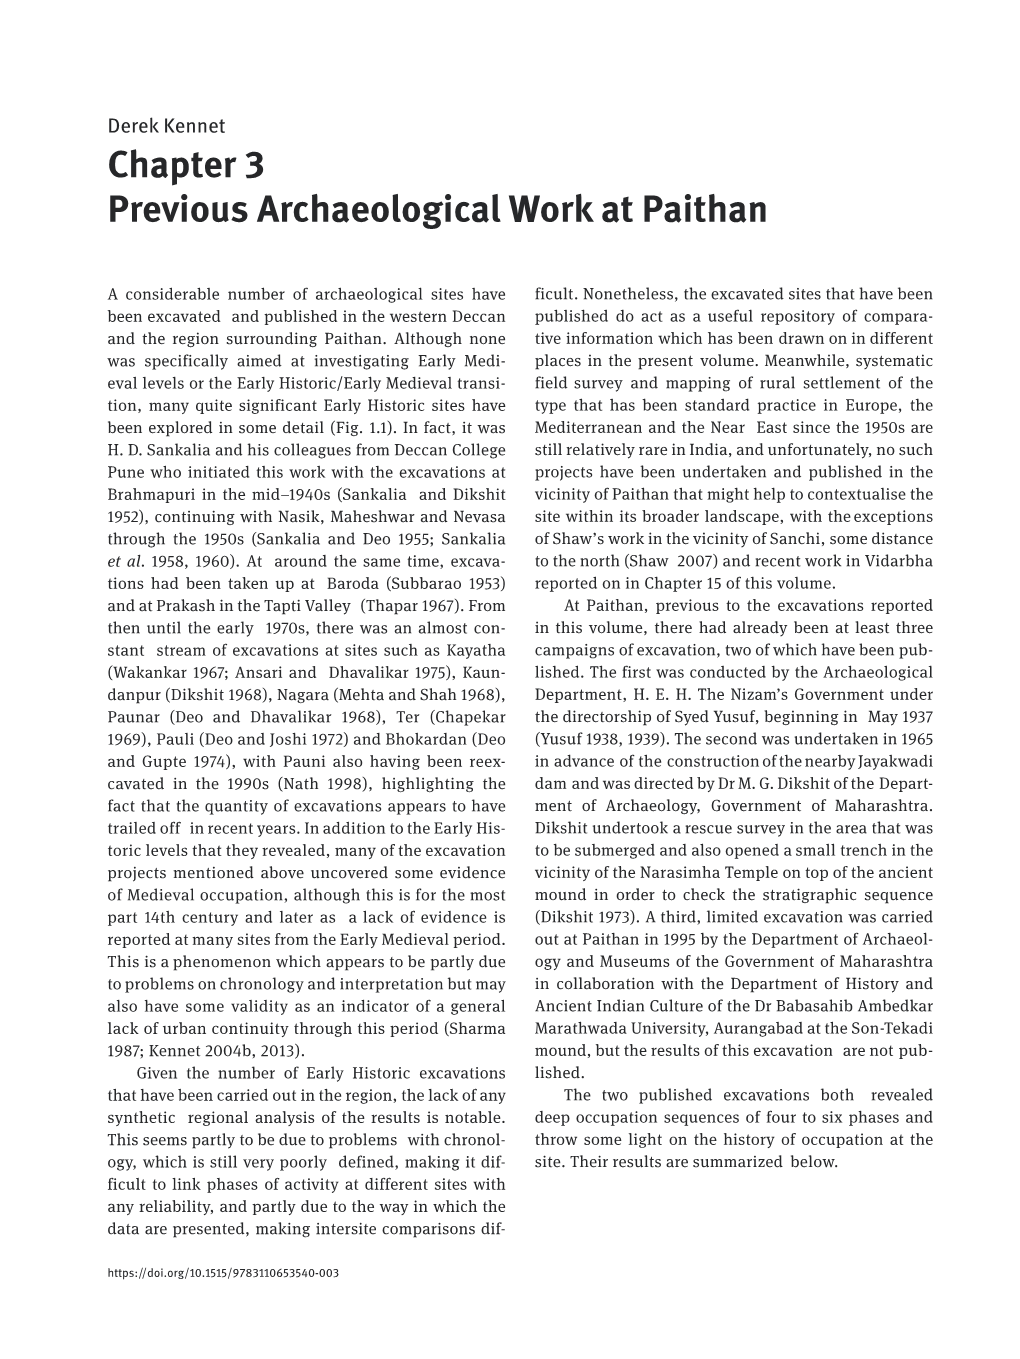 Chapter 3 Previous Archaeological Work at Paithan